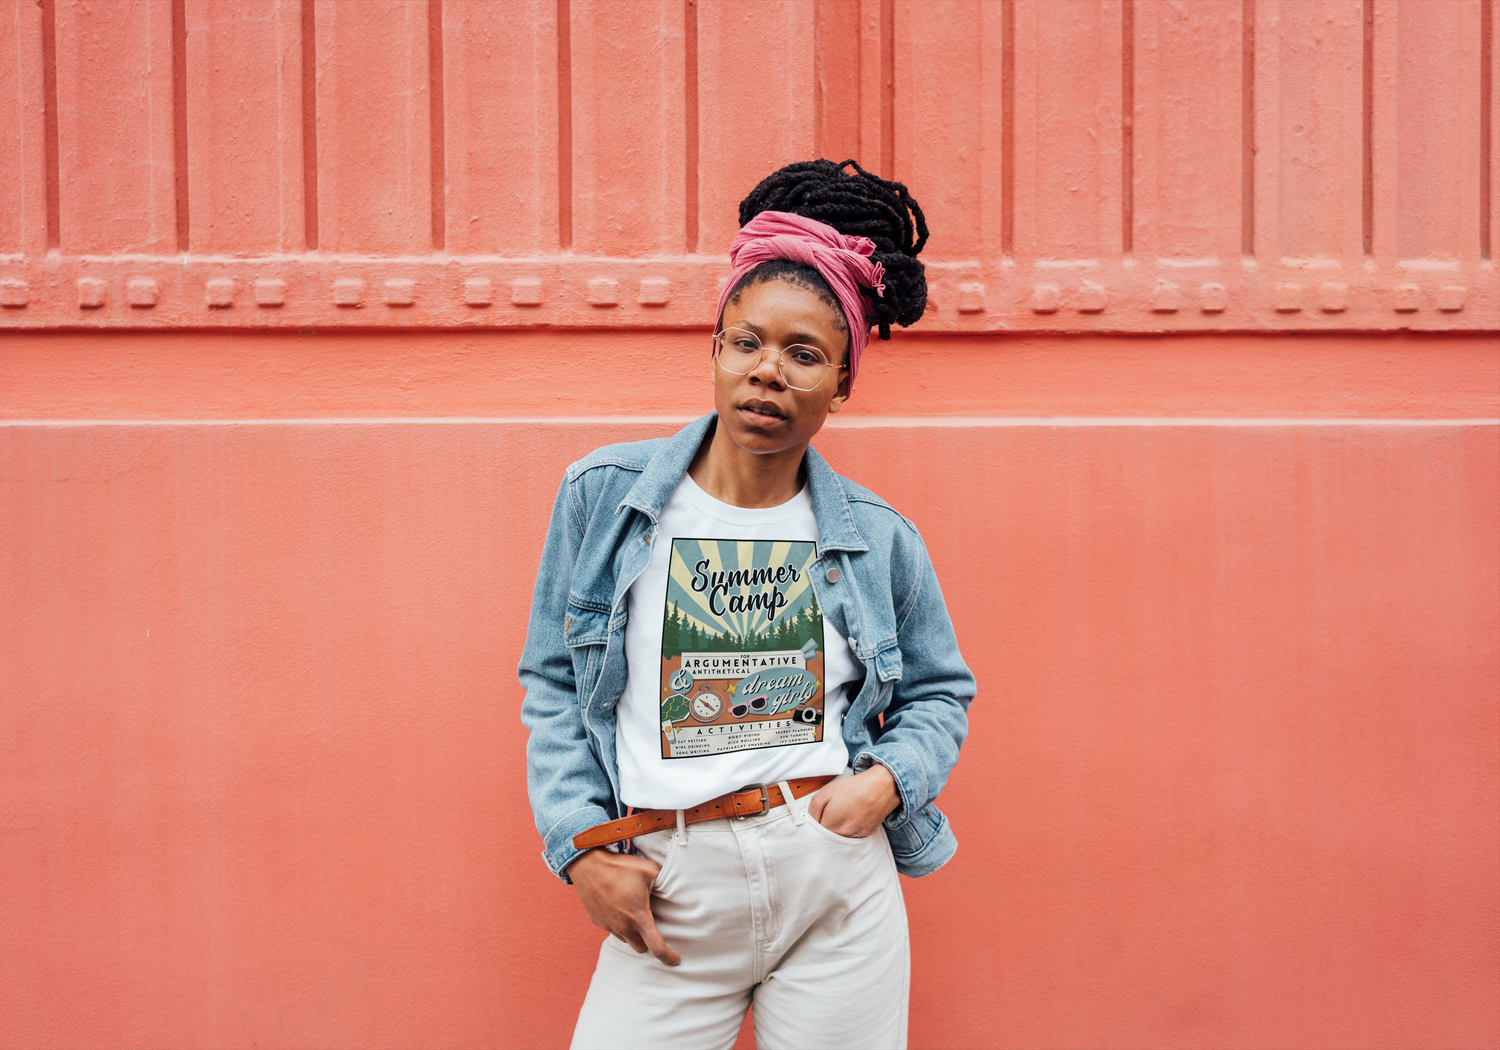 A black women stands with her hands in her pockets, looking past the camera. There is a reddish industrial wall behind her. She is wearing tan pants and a Summer Camp (Taylor's Version) shirt with a jean jacket.